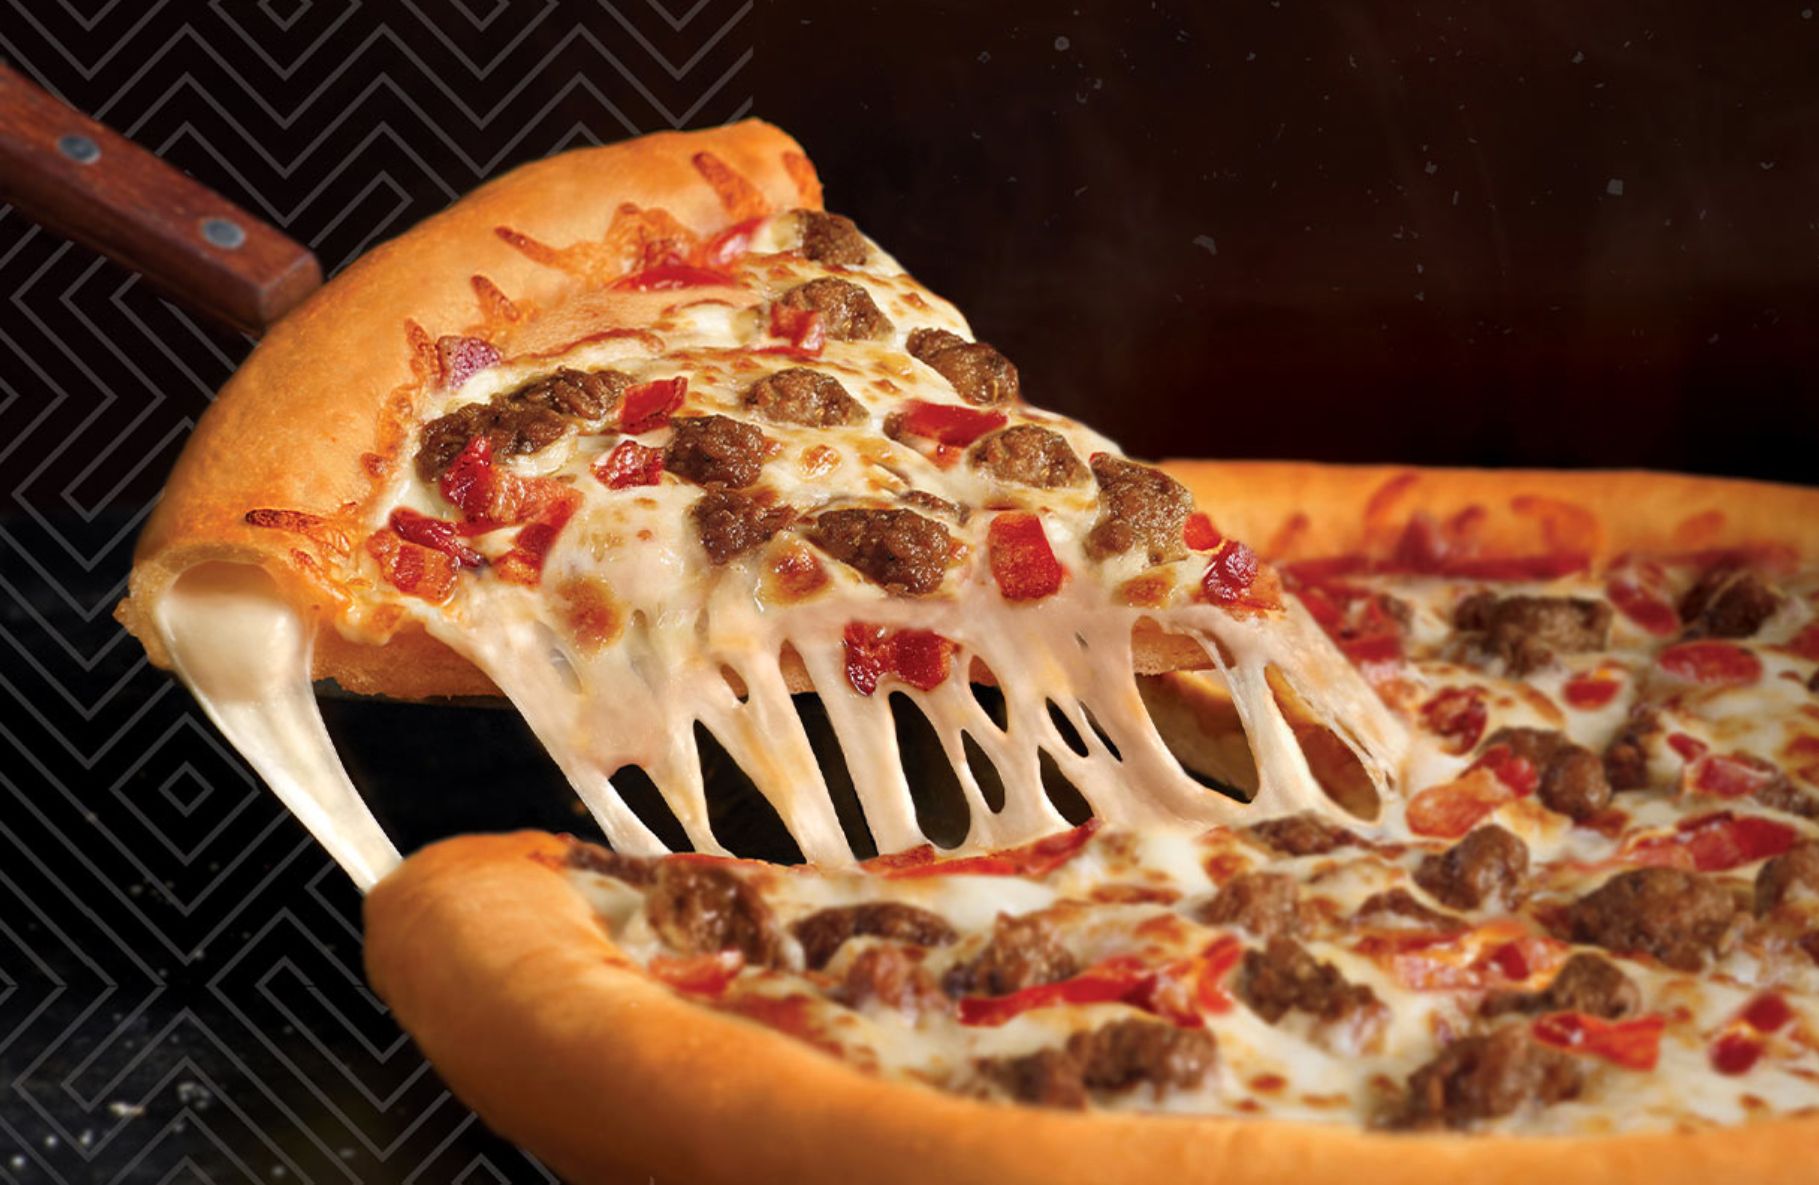 $21.99 Stuffed Crust Savory Sausage & Bacon Pizza Arrives at Round Table Pizza for a Limited Time Only